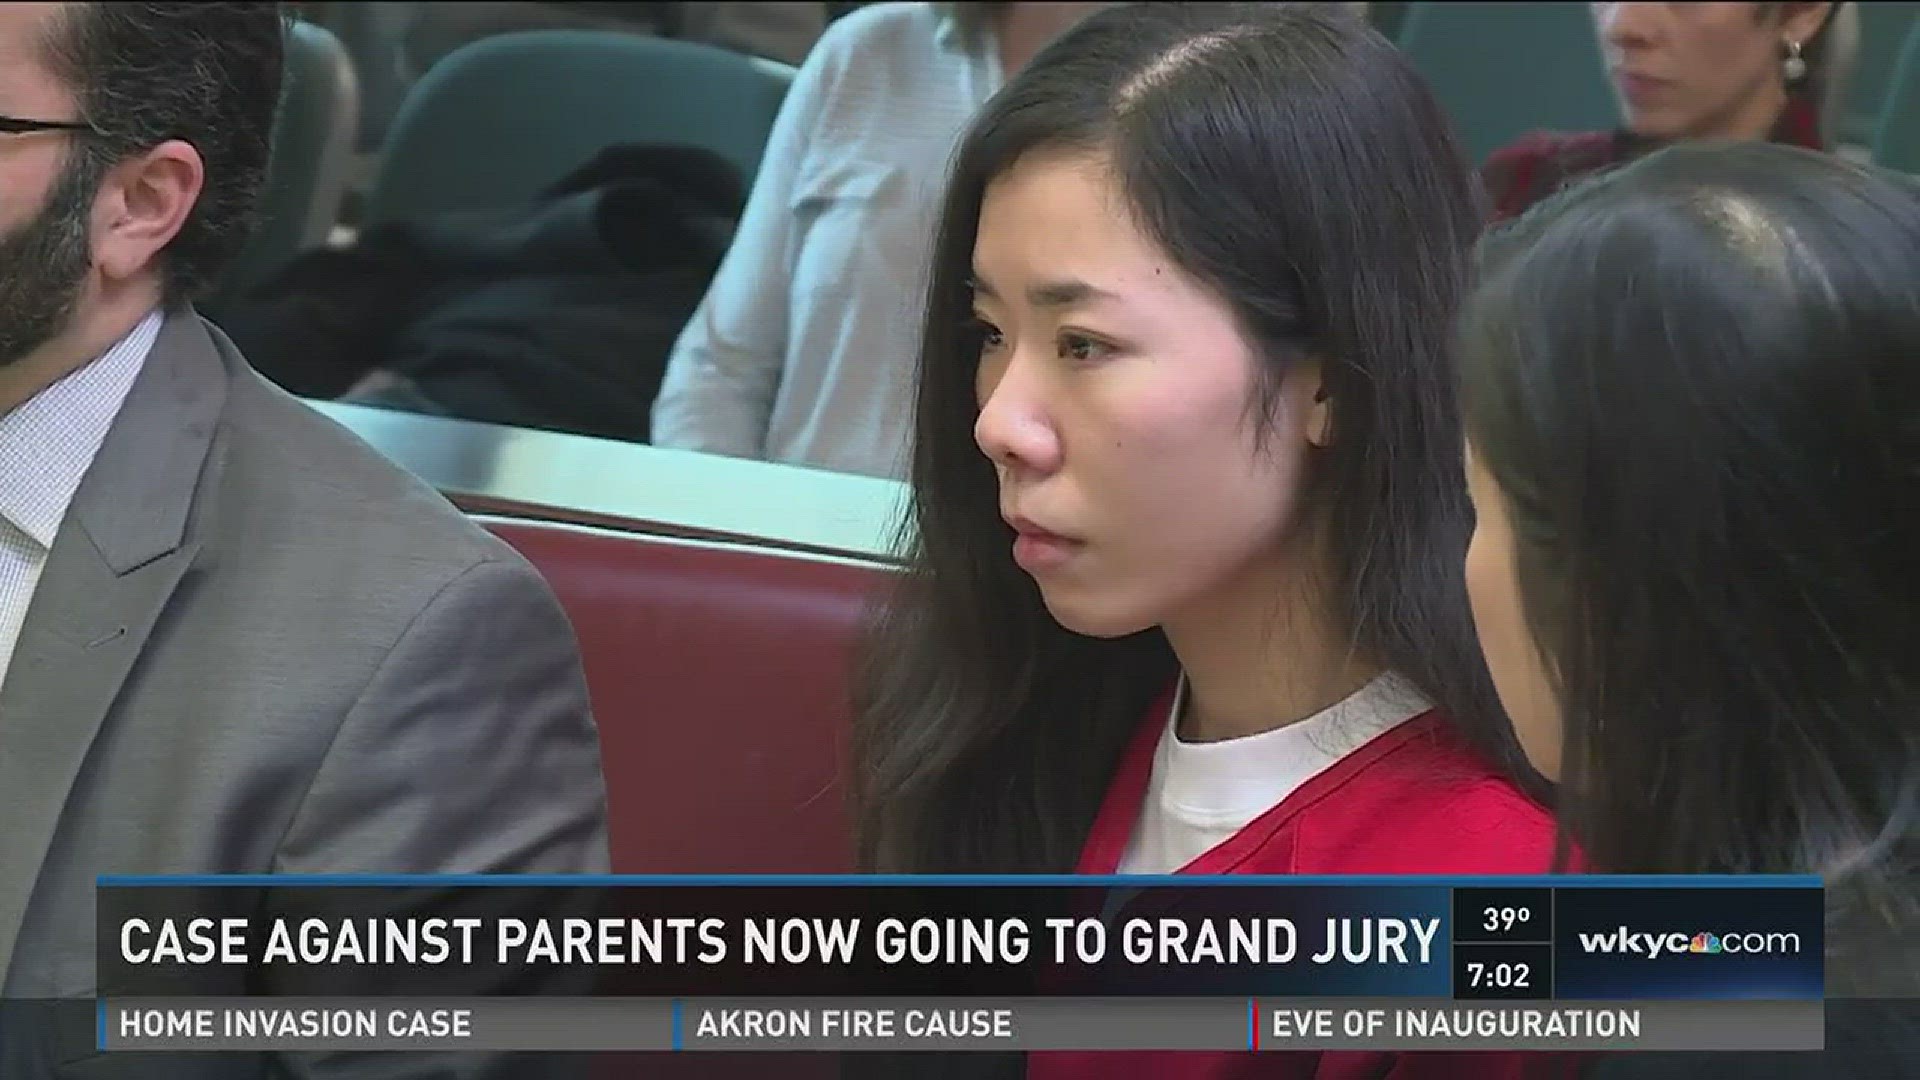 Case against parents now going to grand jury